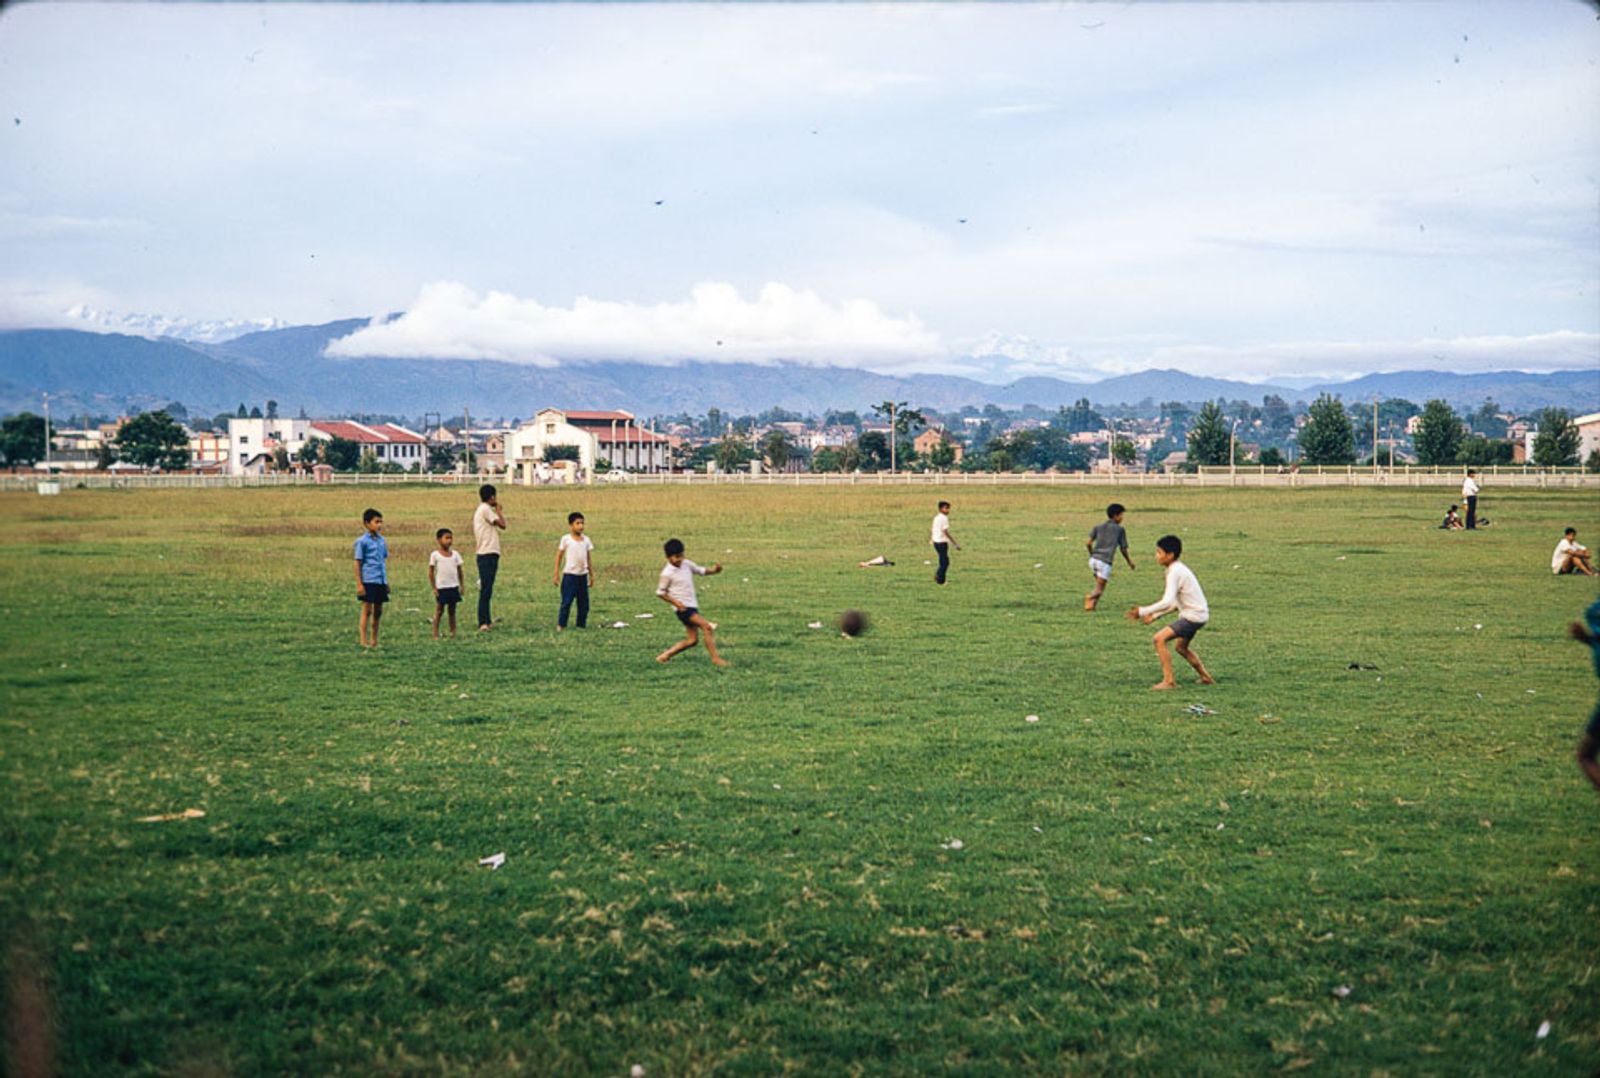 © Tripty Tamang Pakhrin - Archival Photo: 1970, Charles Bailey / Peace Corps Nepal Photo Project by Doug Hall